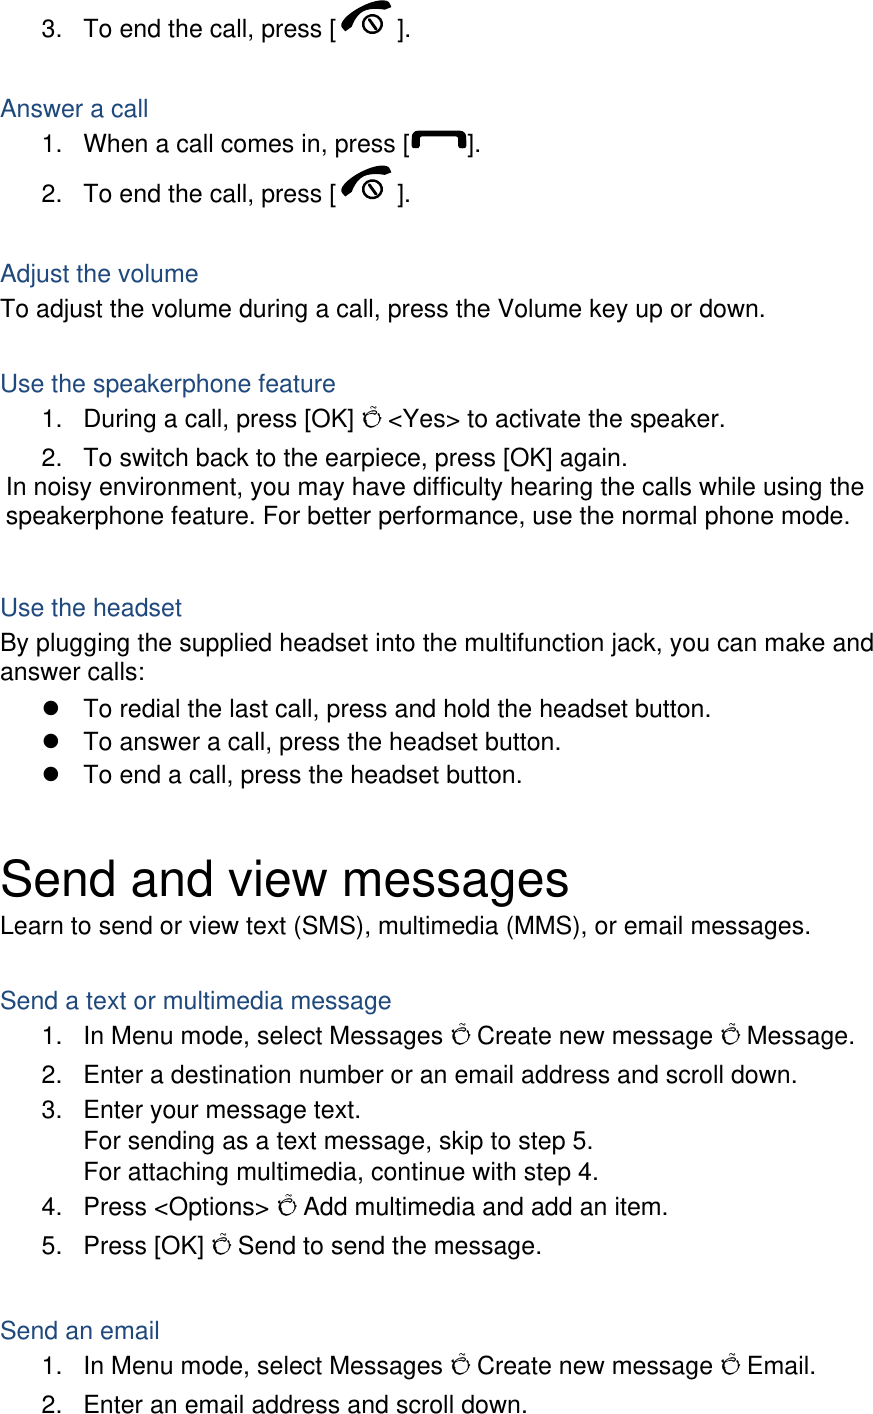 3.  To end the call, press [ ].   Answer a call 1.  When a call comes in, press [ ]. 2.  To end the call, press [ ].  Adjust the volume To adjust the volume during a call, press the Volume key up or down.  Use the speakerphone feature 1.  During a call, press [OK] Õ &lt;Yes&gt; to activate the speaker. 2.  To switch back to the earpiece, press [OK] again. In noisy environment, you may have difficulty hearing the calls while using the speakerphone feature. For better performance, use the normal phone mode.  Use the headset By plugging the supplied headset into the multifunction jack, you can make and answer calls: z  To redial the last call, press and hold the headset button. z  To answer a call, press the headset button. z  To end a call, press the headset button.  Send and view messages Learn to send or view text (SMS), multimedia (MMS), or email messages.  Send a text or multimedia message 1.  In Menu mode, select Messages Õ Create new message Õ Message. 2.  Enter a destination number or an email address and scroll down. 3.  Enter your message text.   For sending as a text message, skip to step 5. For attaching multimedia, continue with step 4. 4. Press &lt;Options&gt; Õ Add multimedia and add an item. 5. Press [OK] Õ Send to send the message.  Send an email 1.  In Menu mode, select Messages Õ Create new message Õ Email. 2.  Enter an email address and scroll down. 